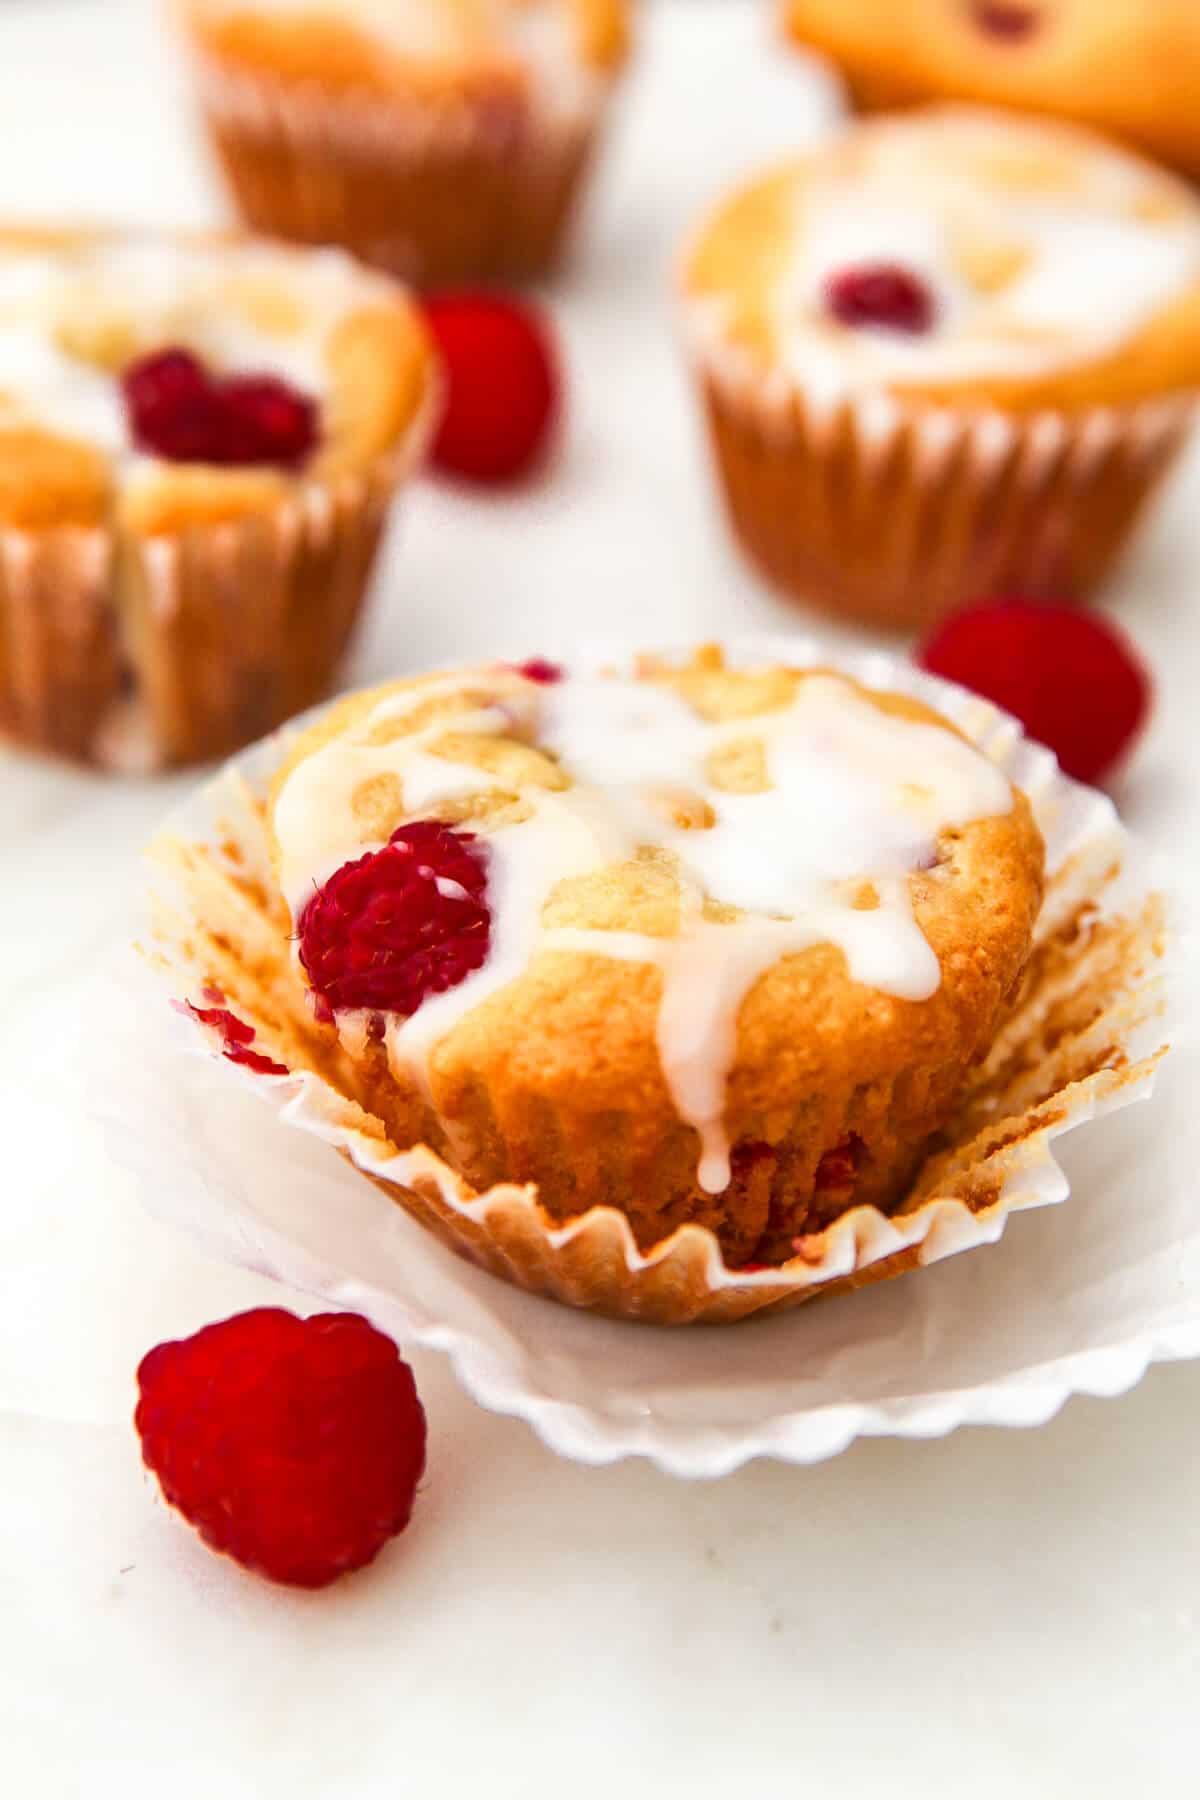 Vegan raspberry muffins on a marble countertop with fresh red raspberries around them.